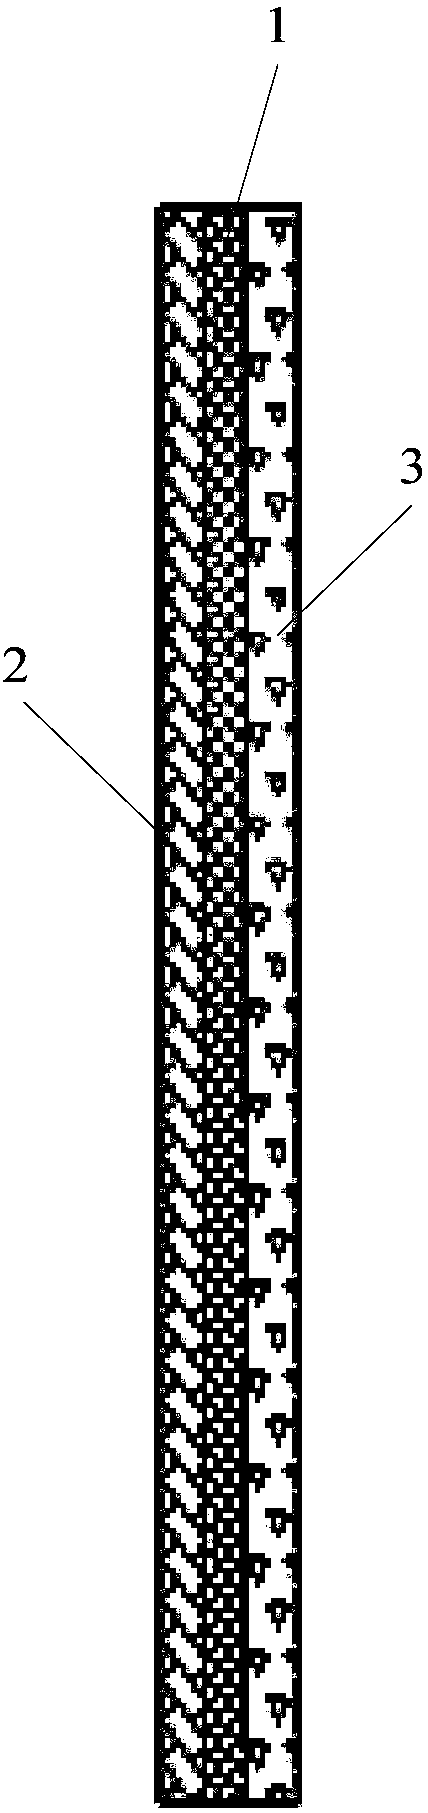 Support membrane for flexible display panel, flexible display panel and preparation method thereof